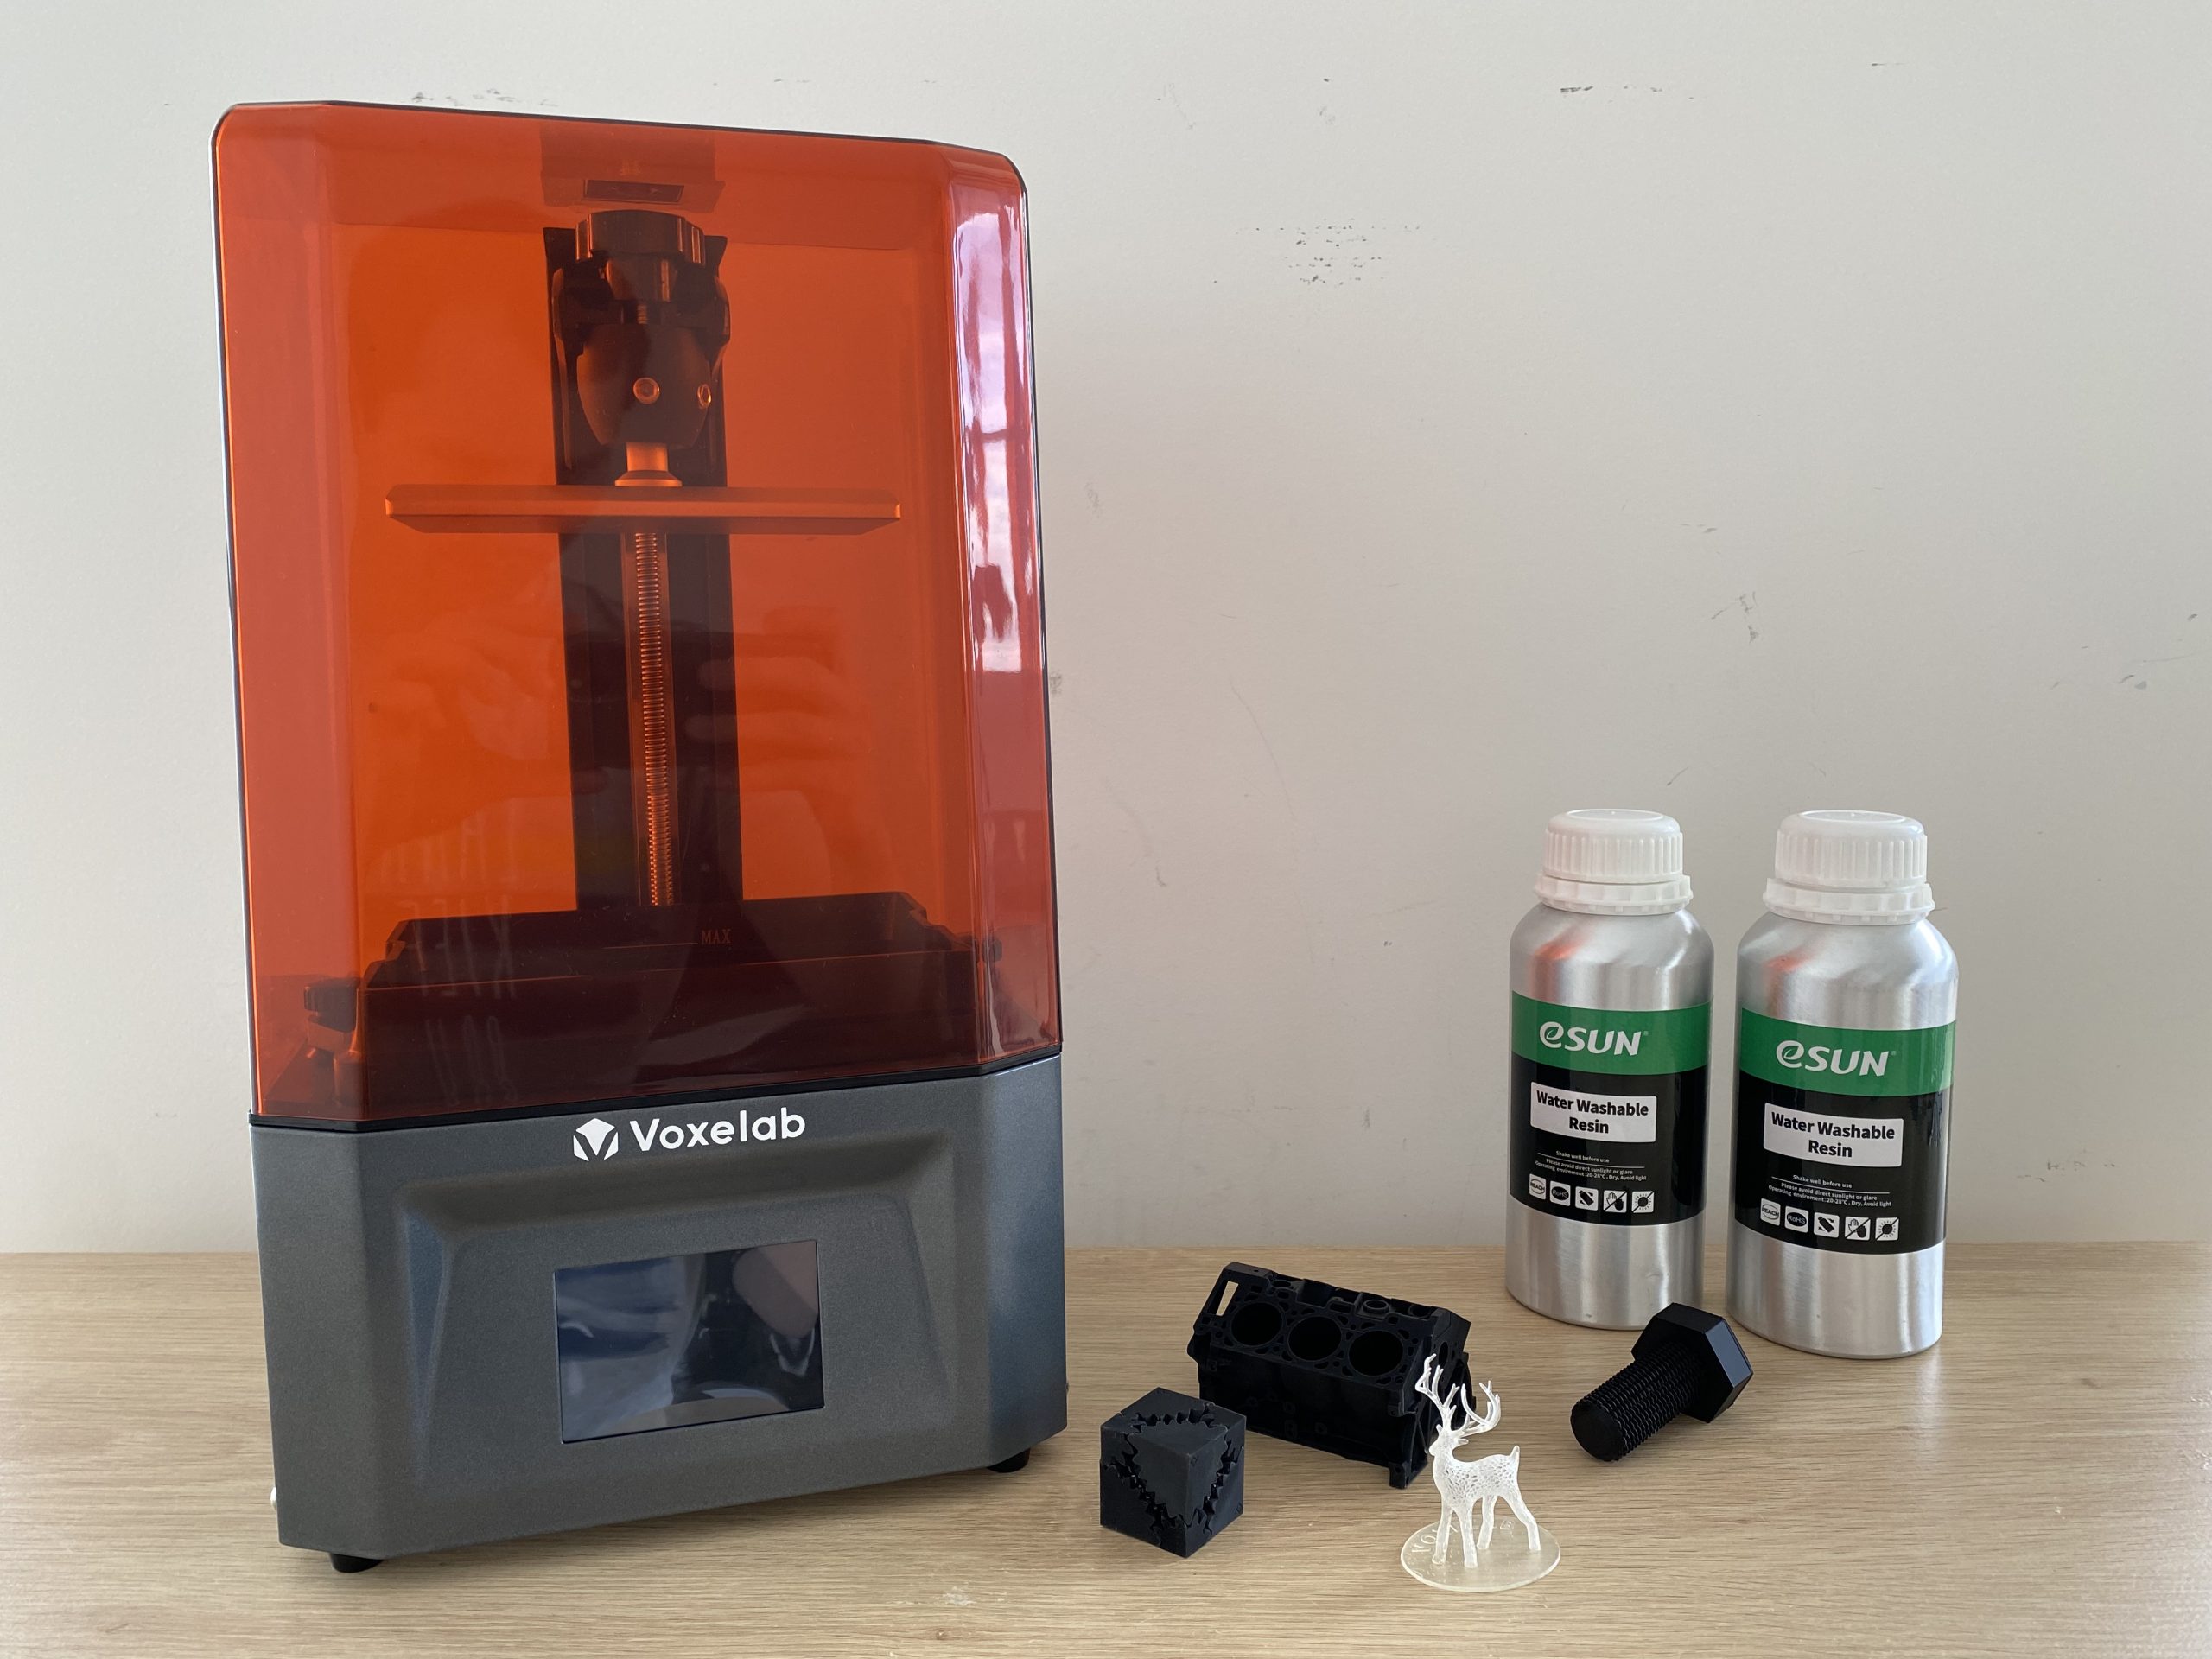 Voxelab Proxima 6.0 SLA 3D Printer Unboxing and Review